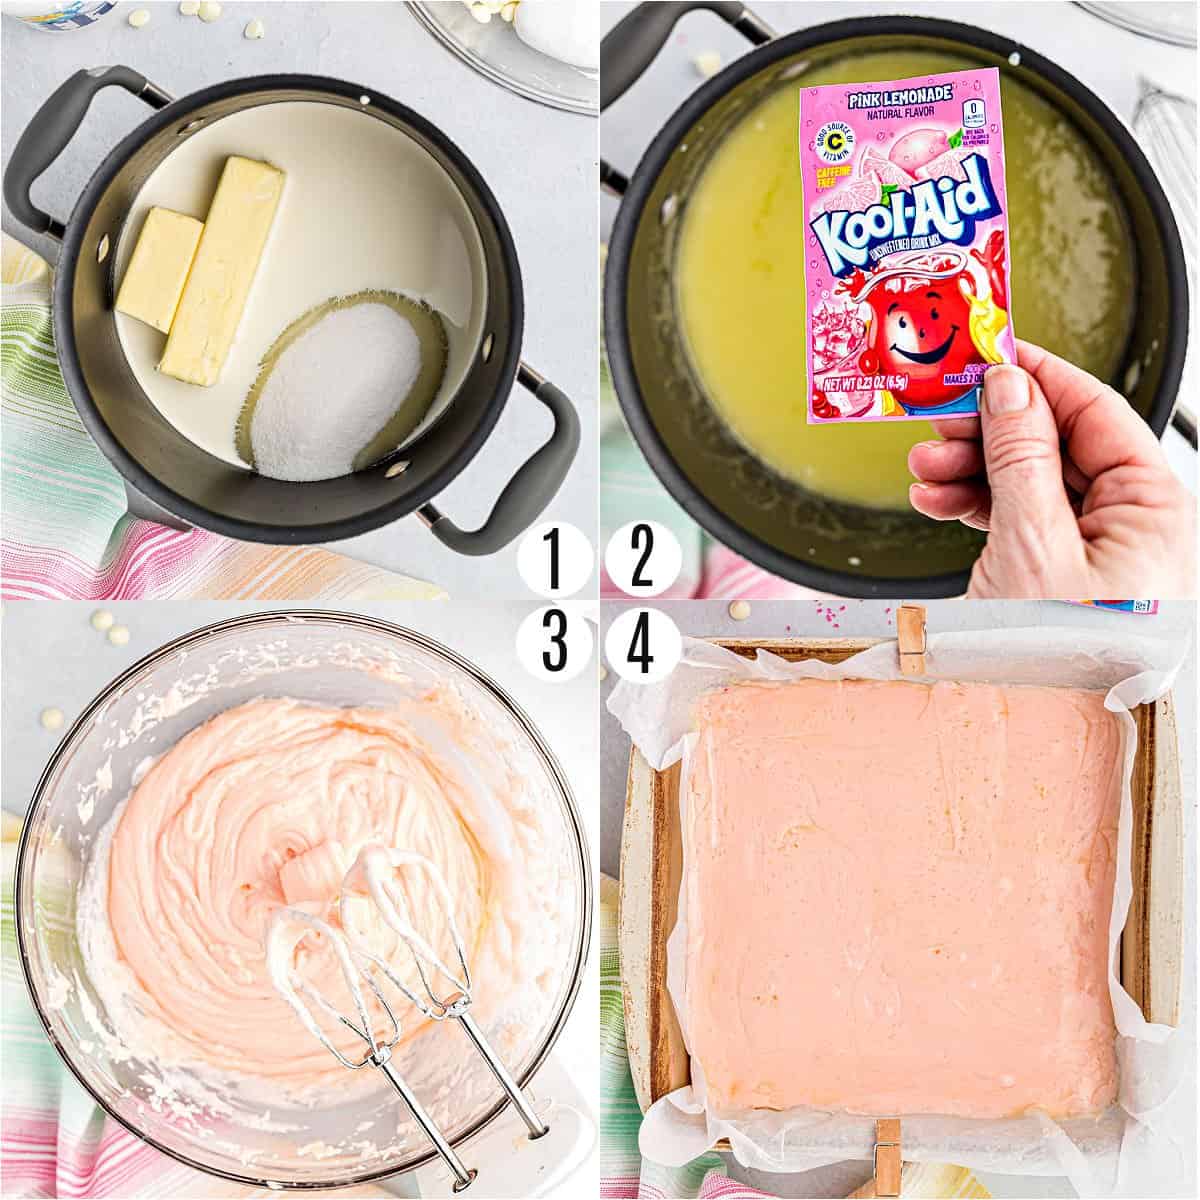 Step by step photos showing how to make pink lemonade fudge.